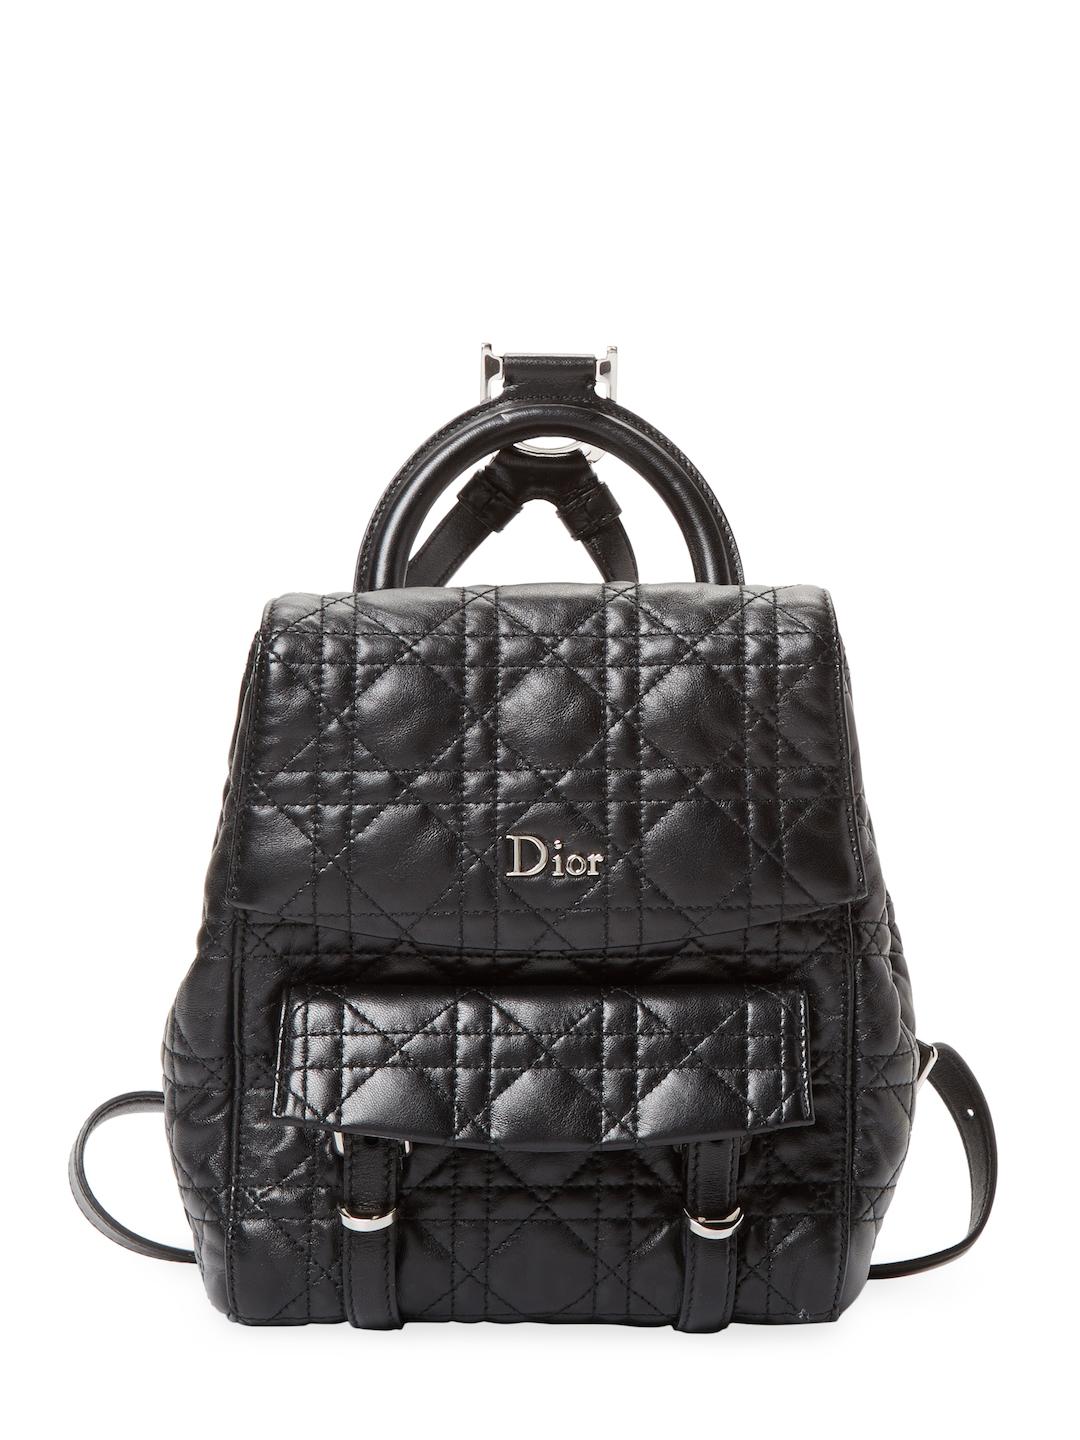 Dior Quilted Leather Backpack in Black - Lyst